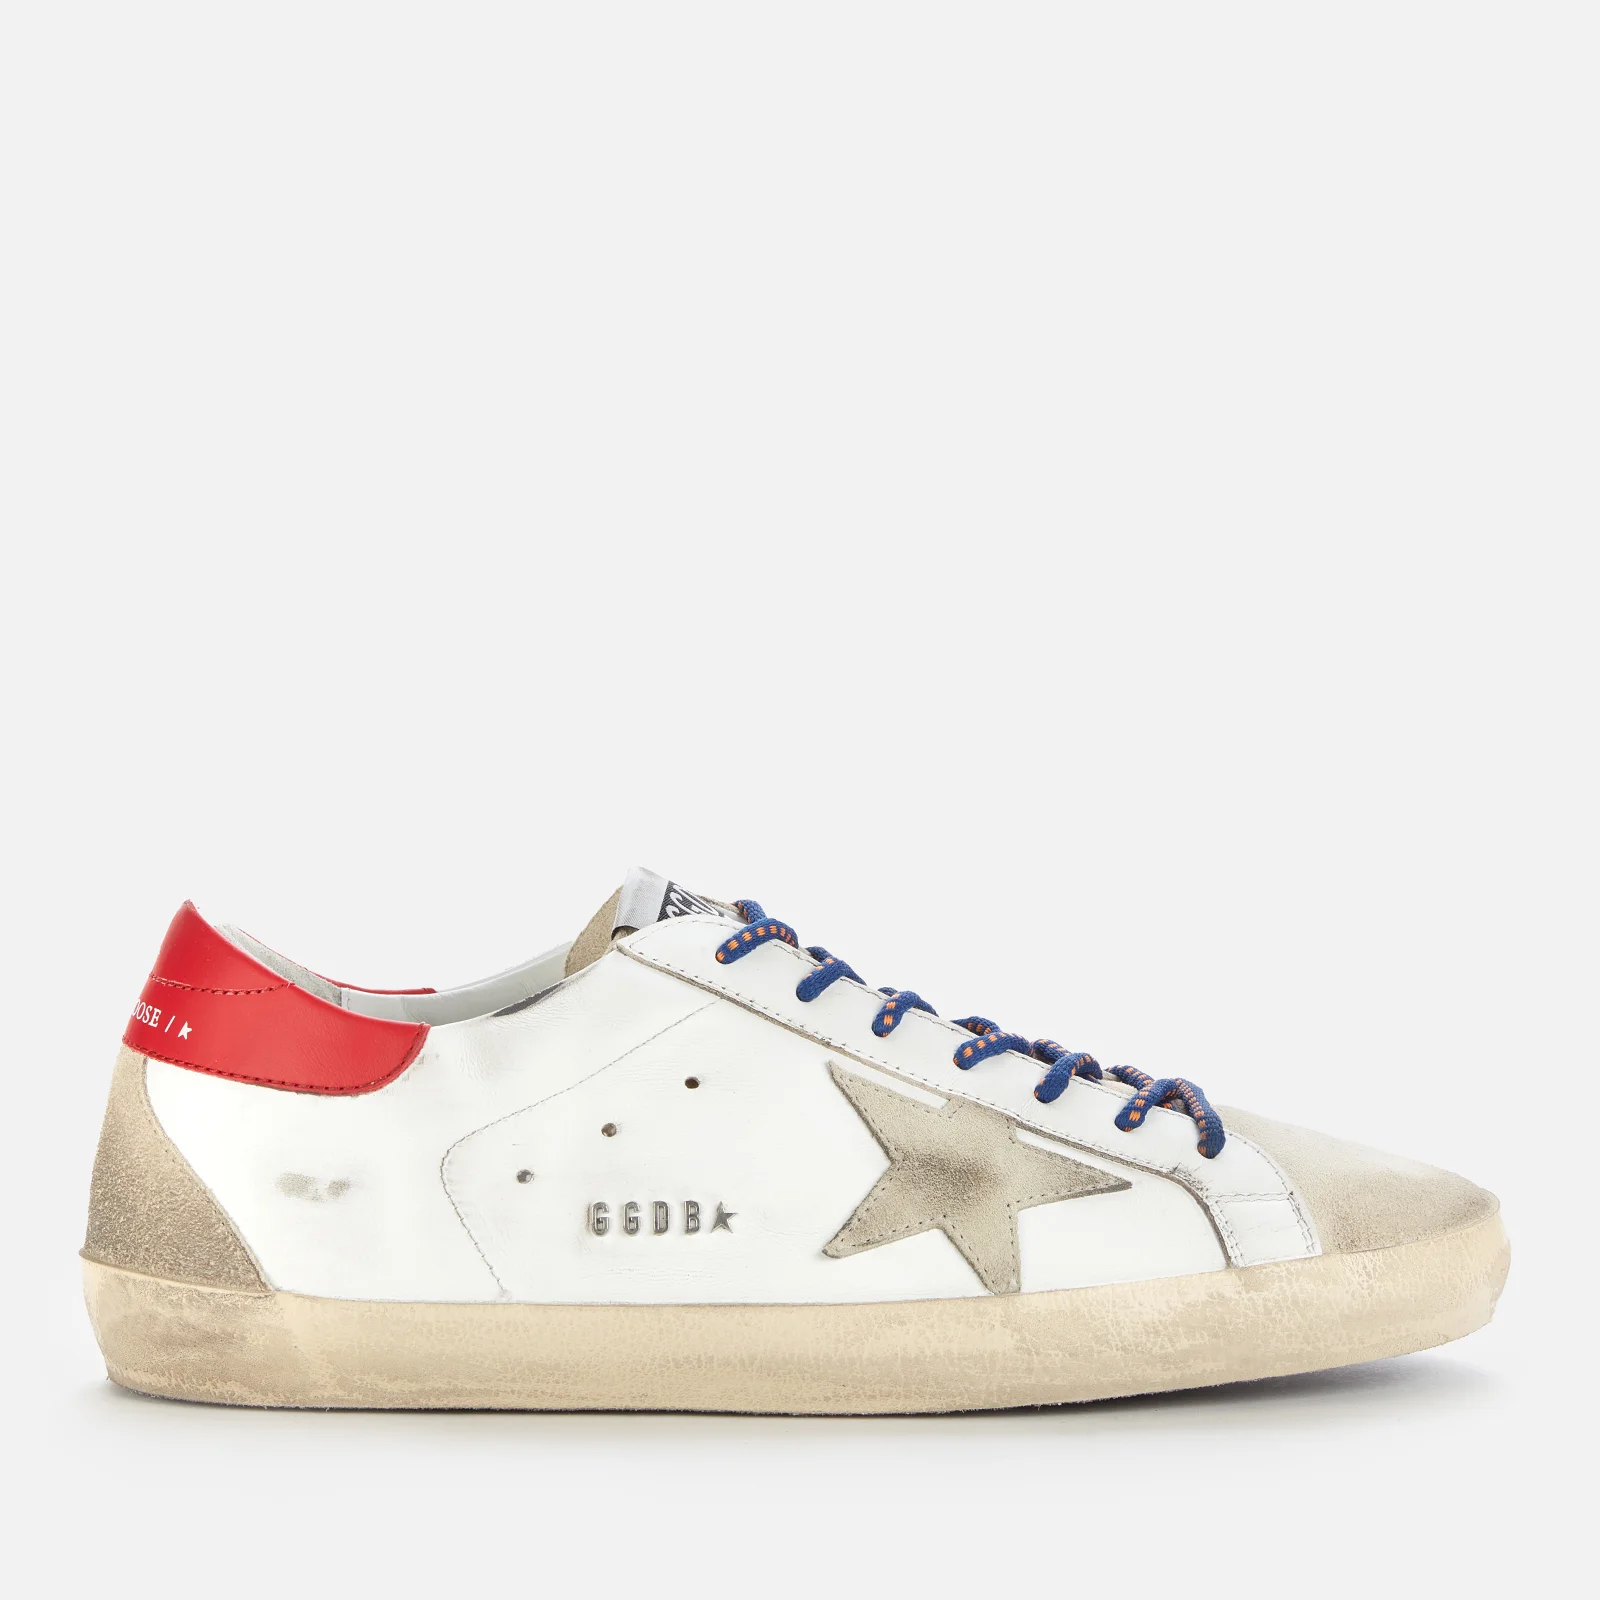 Golden Goose Men's Superstar Leather Trainers - Ice/White/Seedpearl/Red Image 1